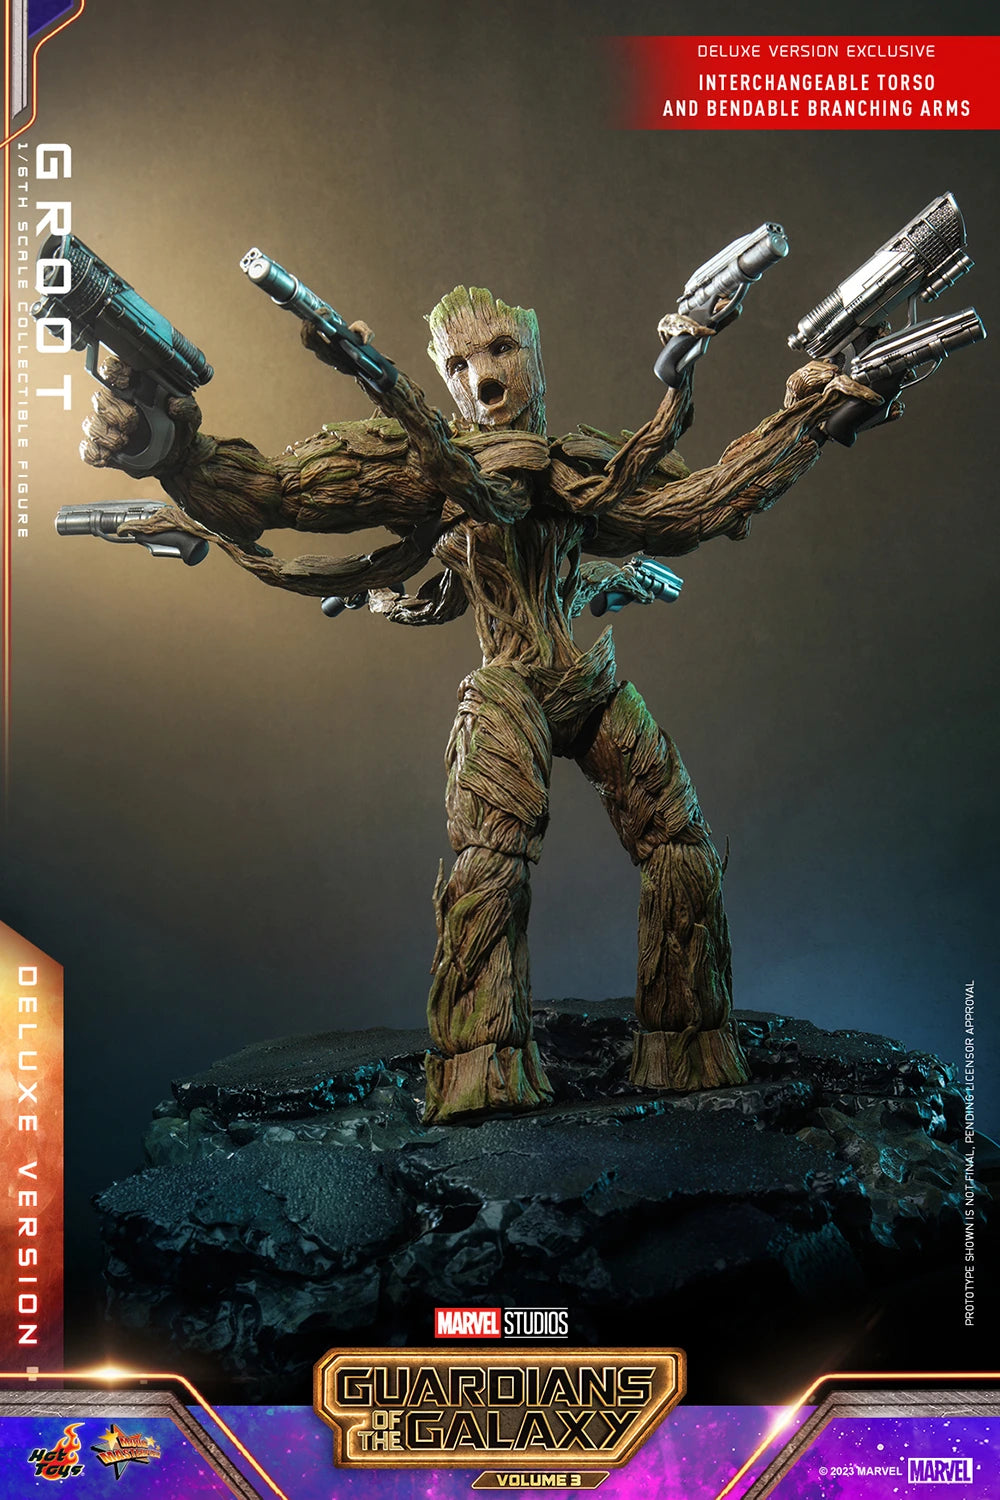 Hot Toys Groot Life-Size Special Edition Figure, Guardians of the Galaxy:  Volume 2